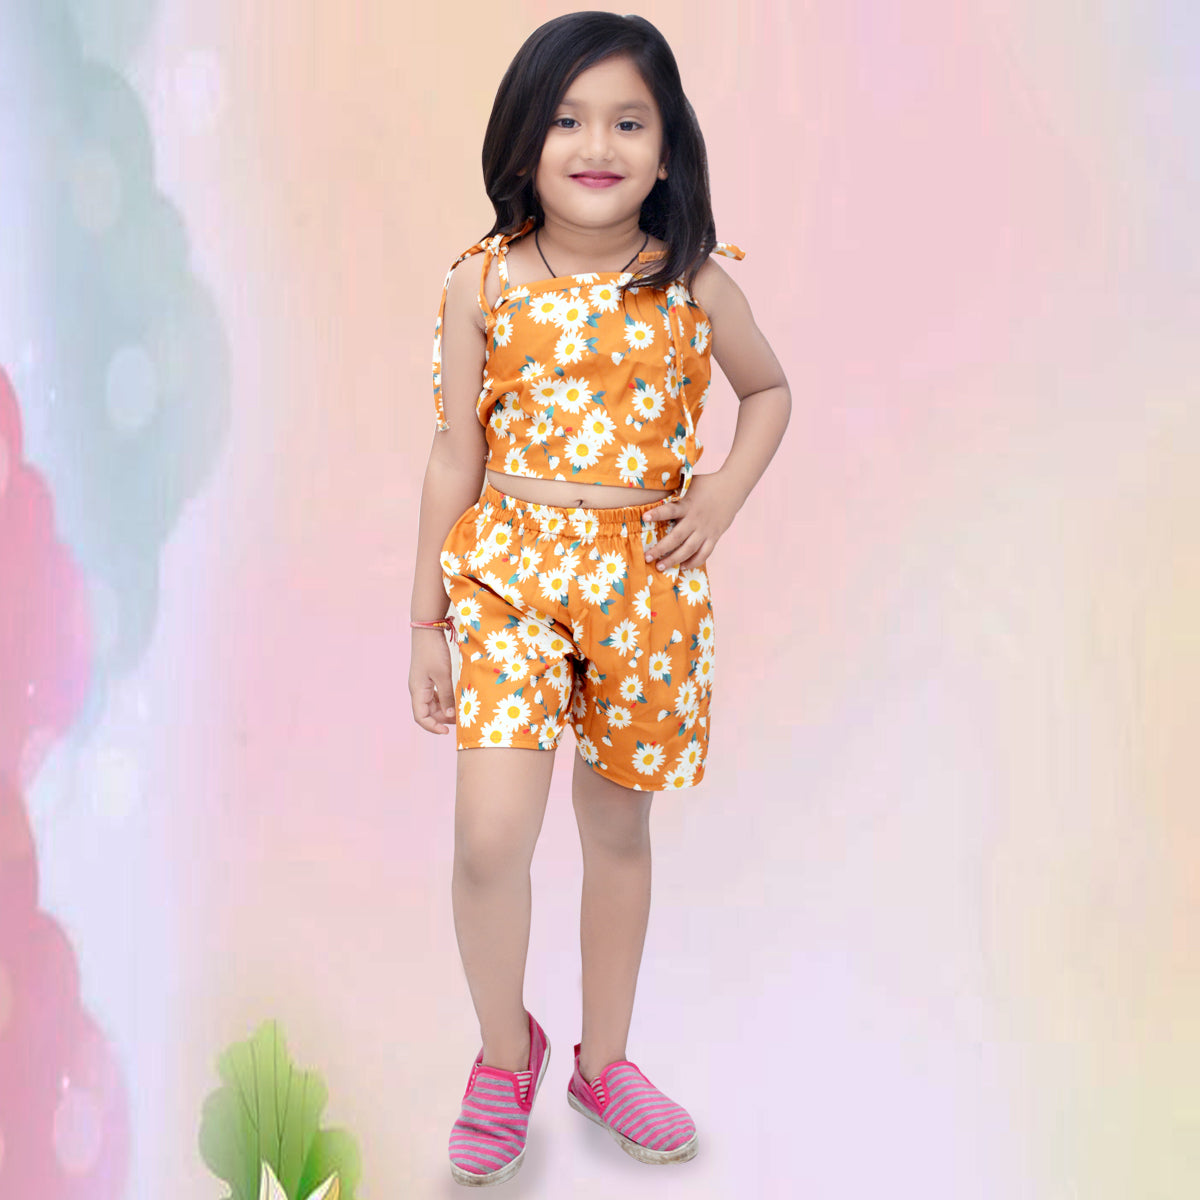 Princess BabyGirl's Stylish Floral Tunic Frocks & Yellow Lining Strip Set Combo for Kids.